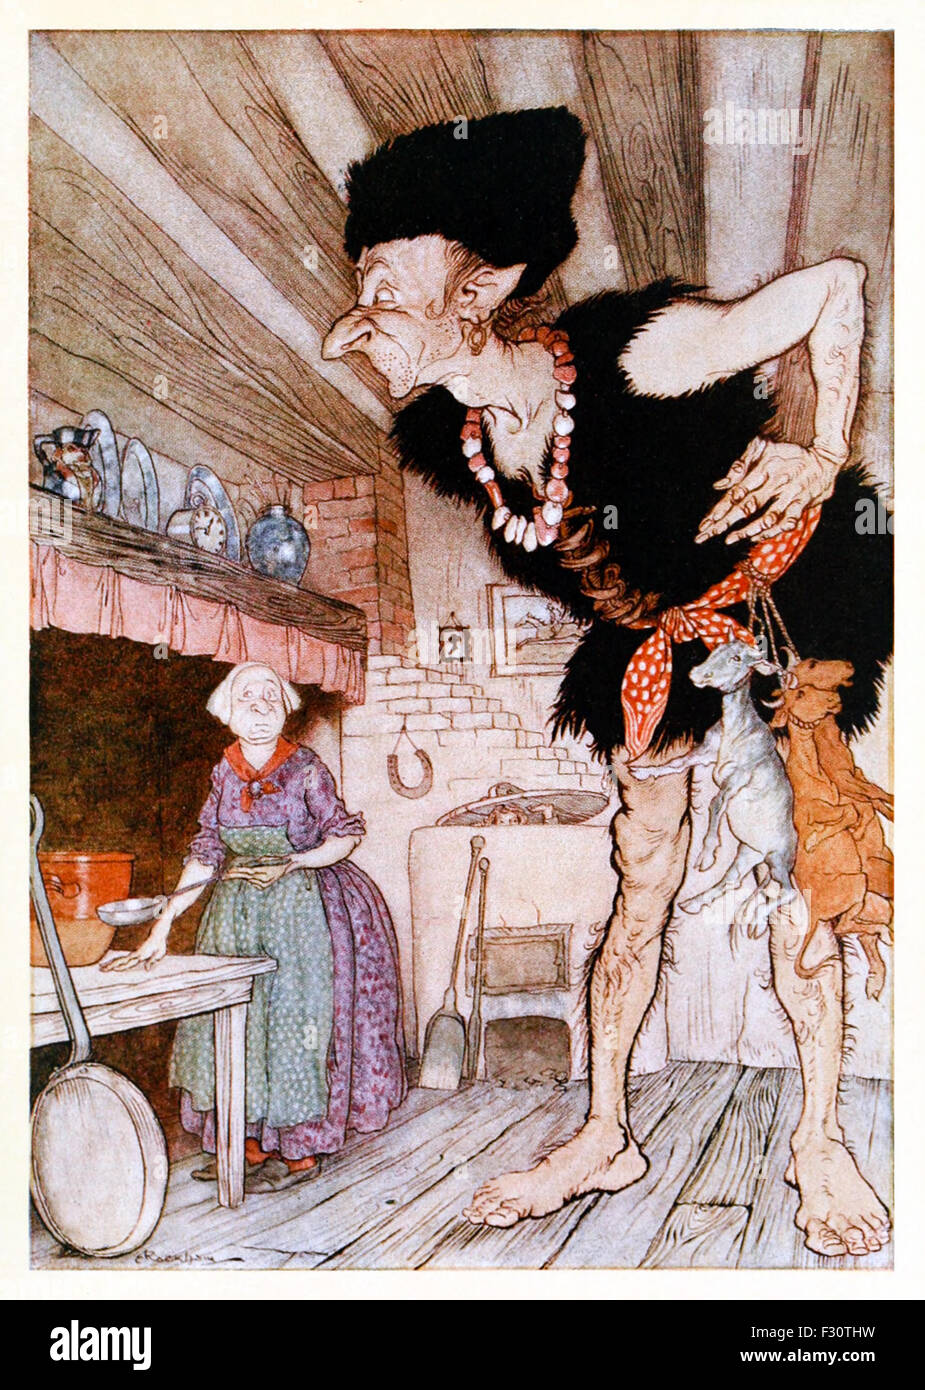 'Fee-fi-fo-fum, I smell the blood of an Englishman' from 'Jack and the Beanstalk' in 'English Fairy Tales', illustration by Arthur Rackham (1867-1939). See description for more information. Stock Photo